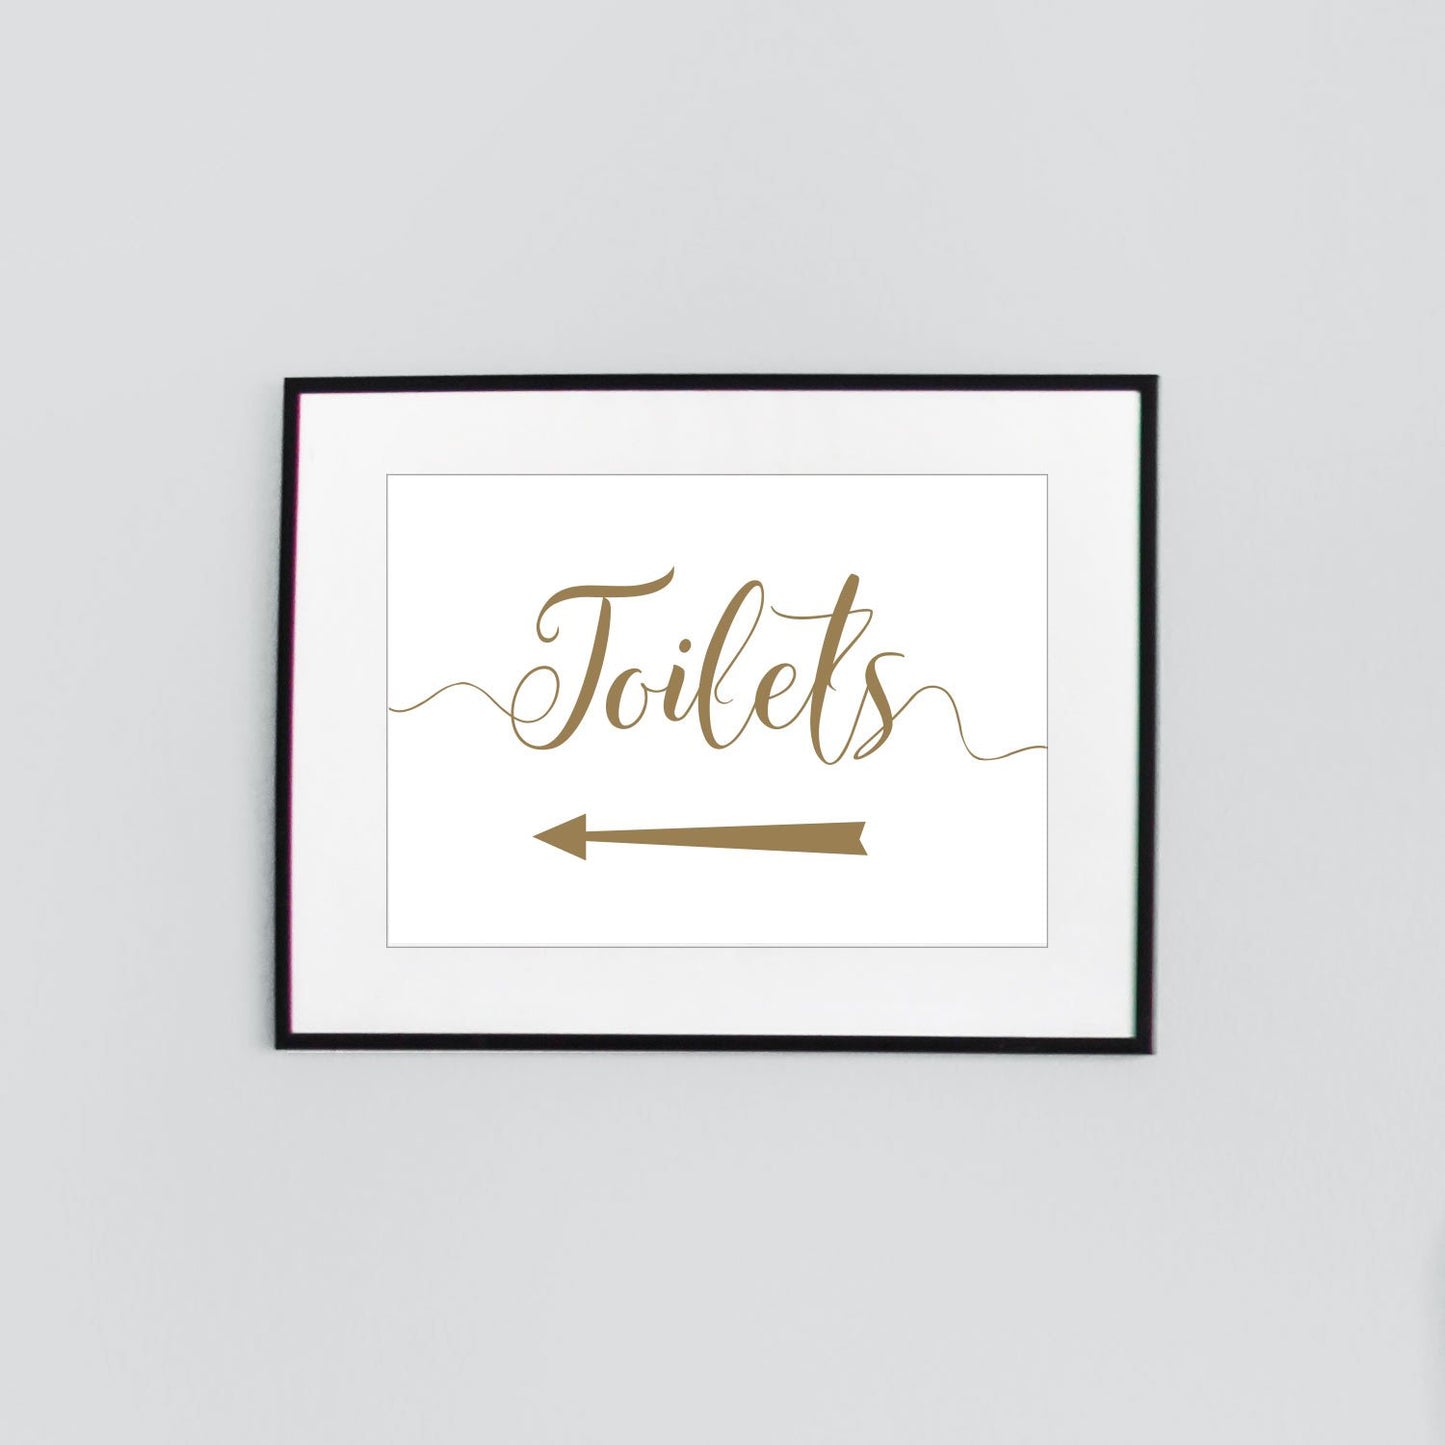 framed toilets sign with gold text and left arrow